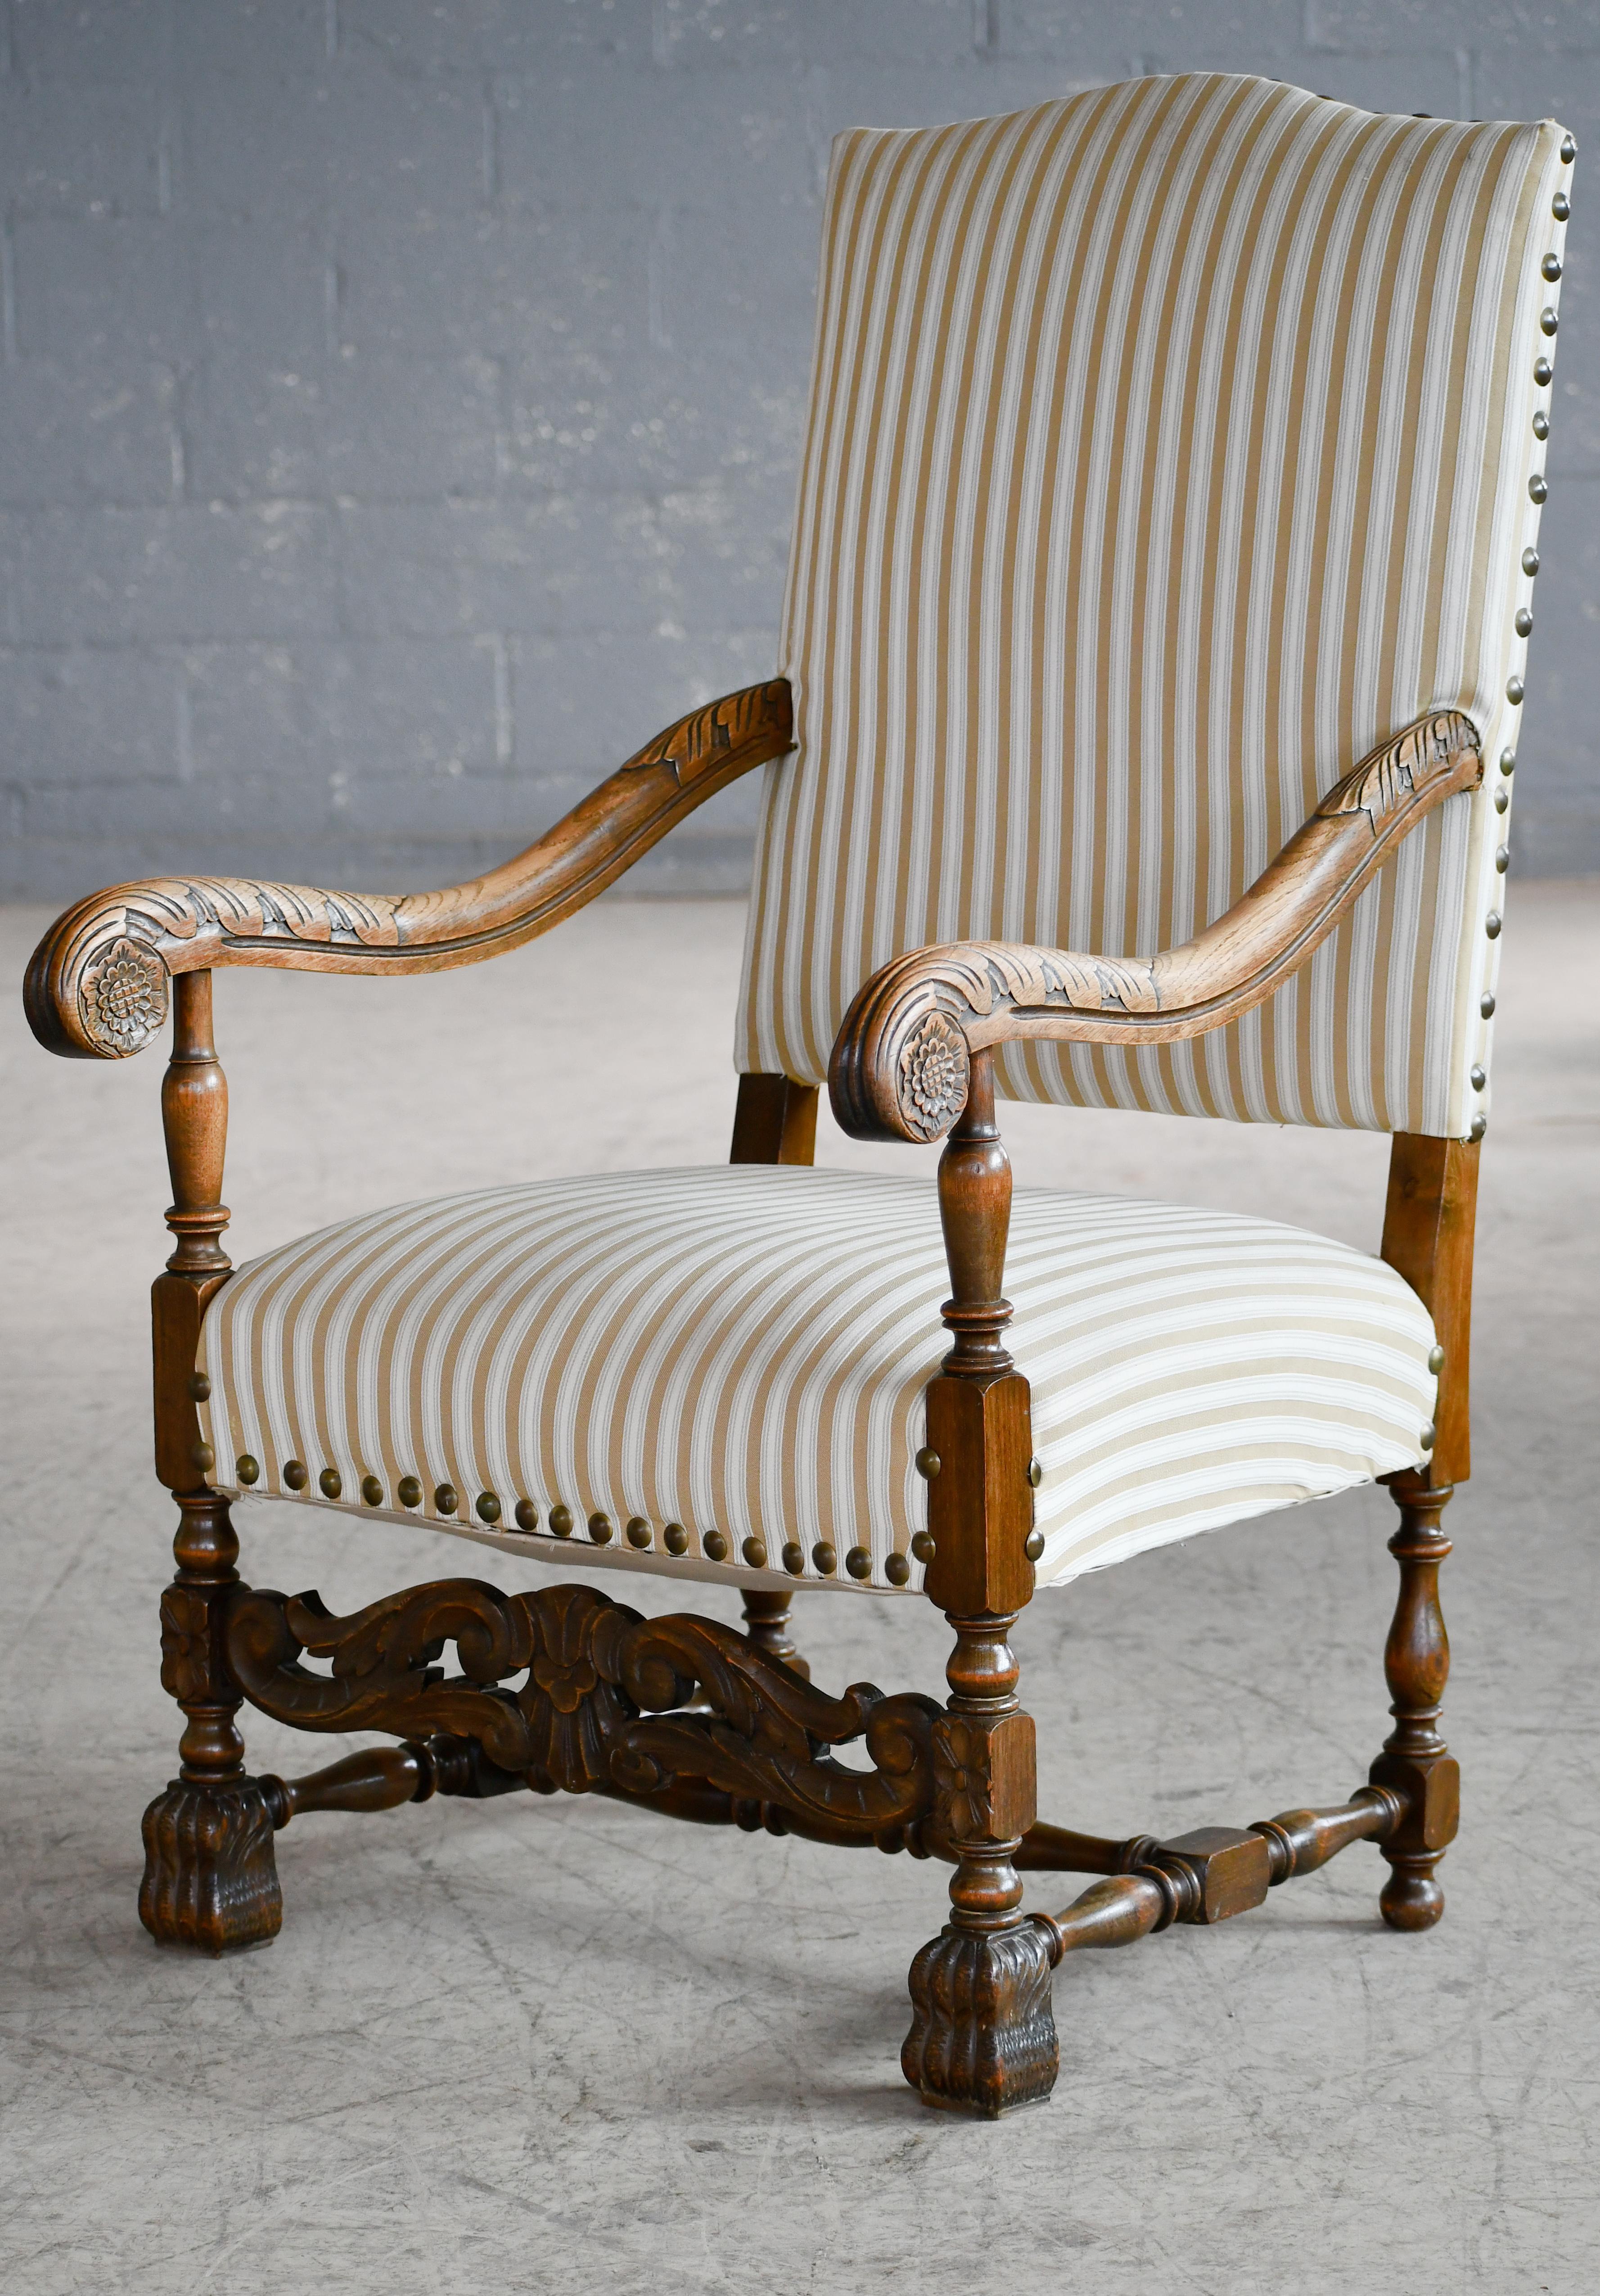 Early 20th Century Danish Throne Chair in Carved Oak, circa 1900 Bindesboll Style For Sale